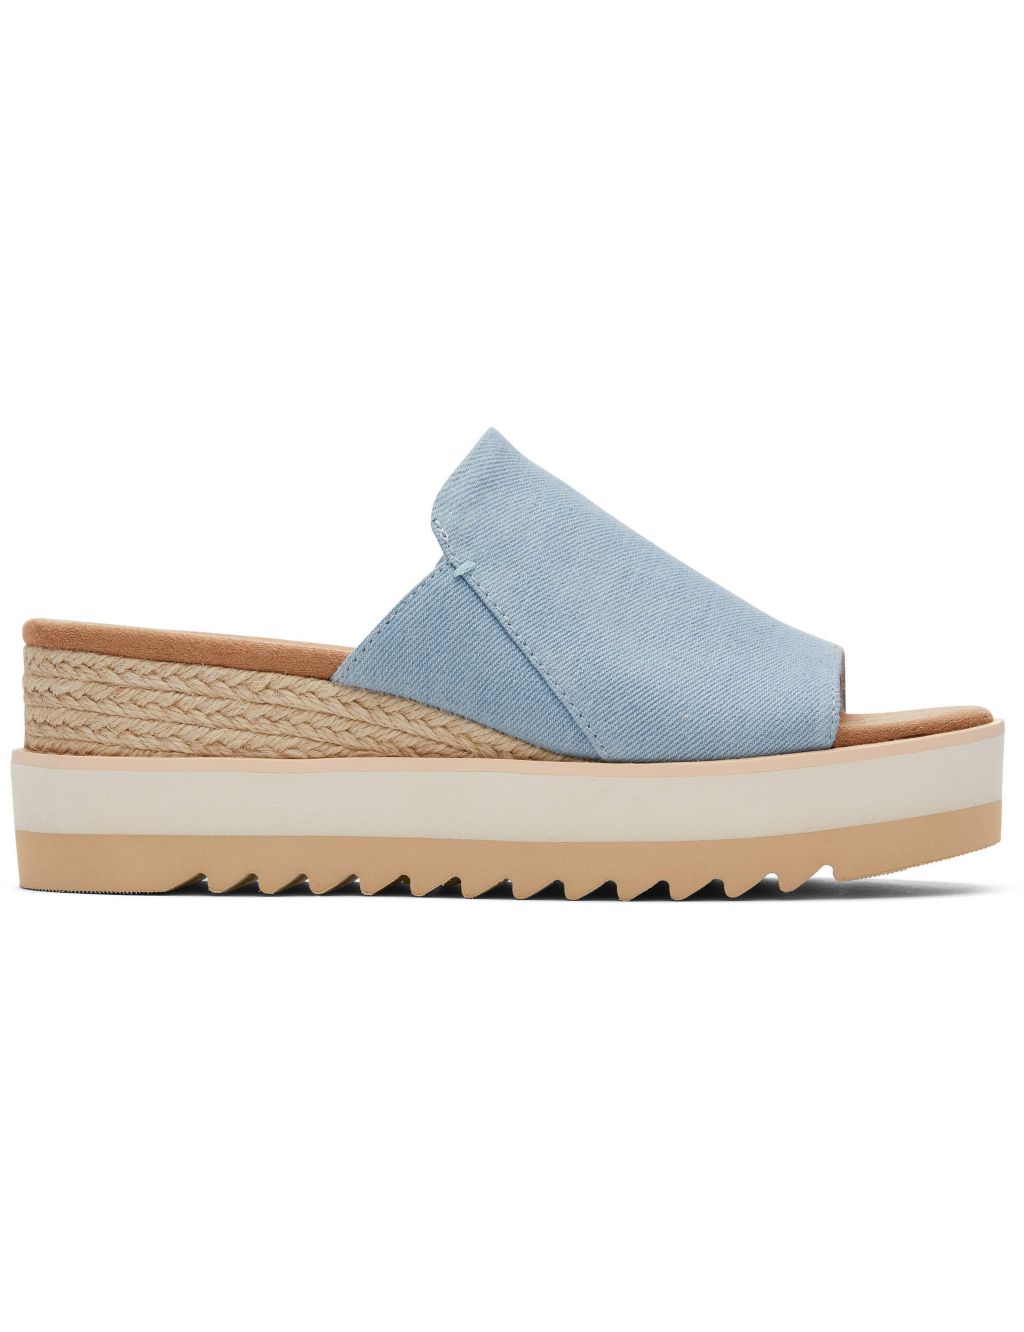 Canvas Wedge Mules image 1